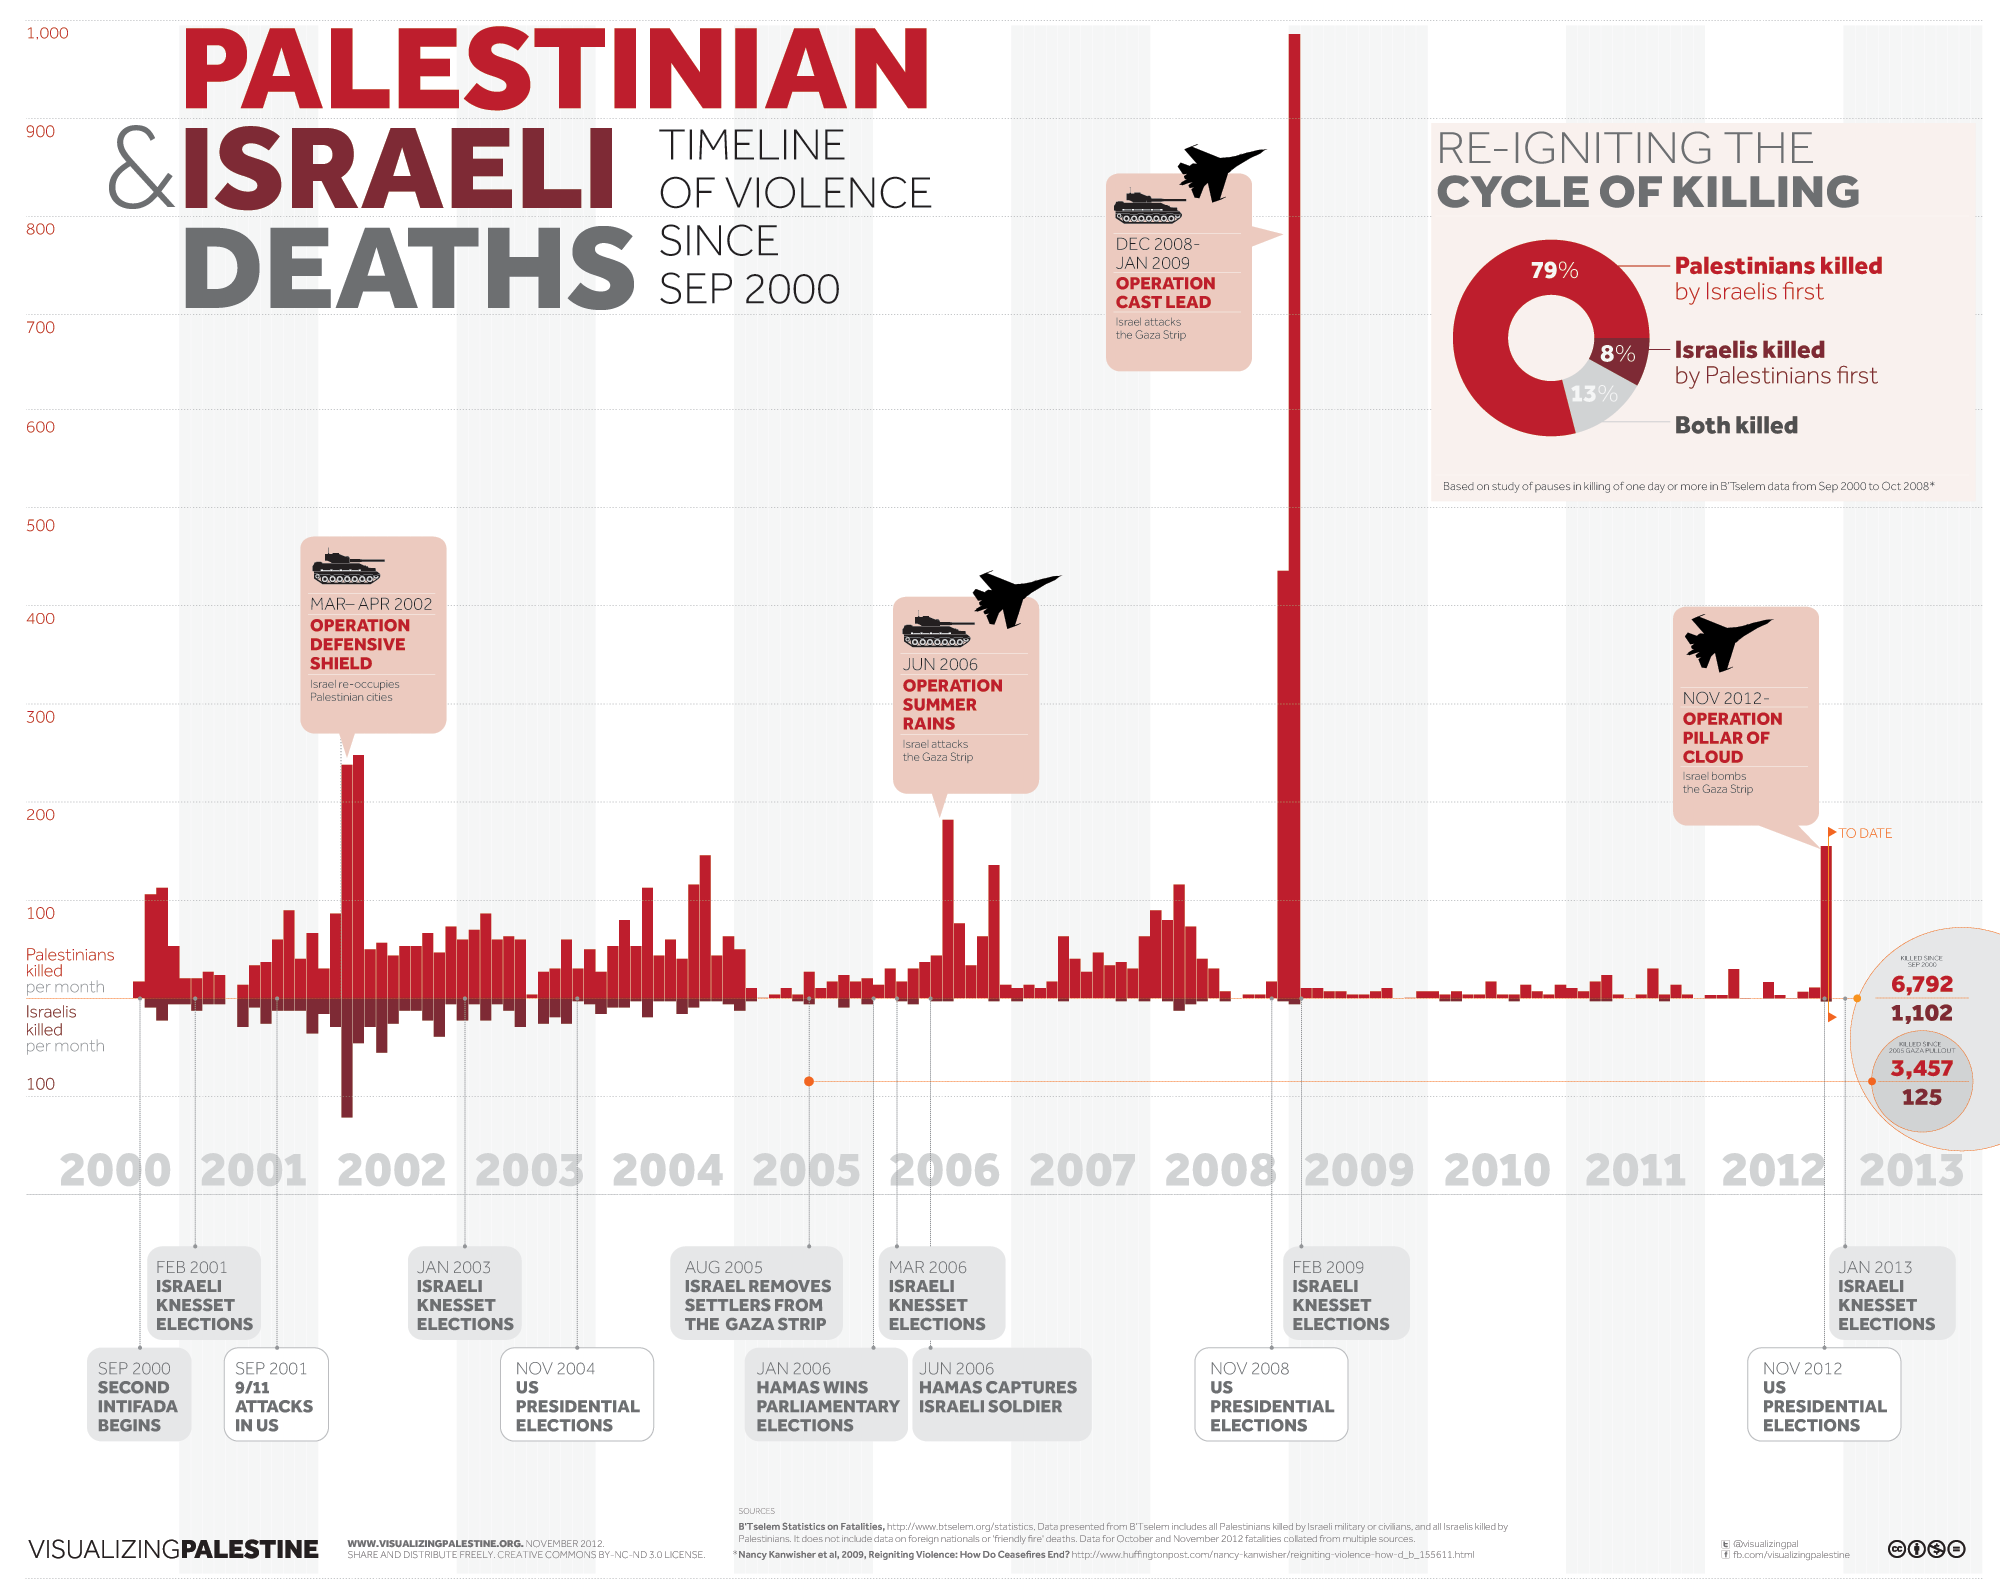 IsraelPalestine Violence Timeline The Sobering Reality (INFOGRAPHIC